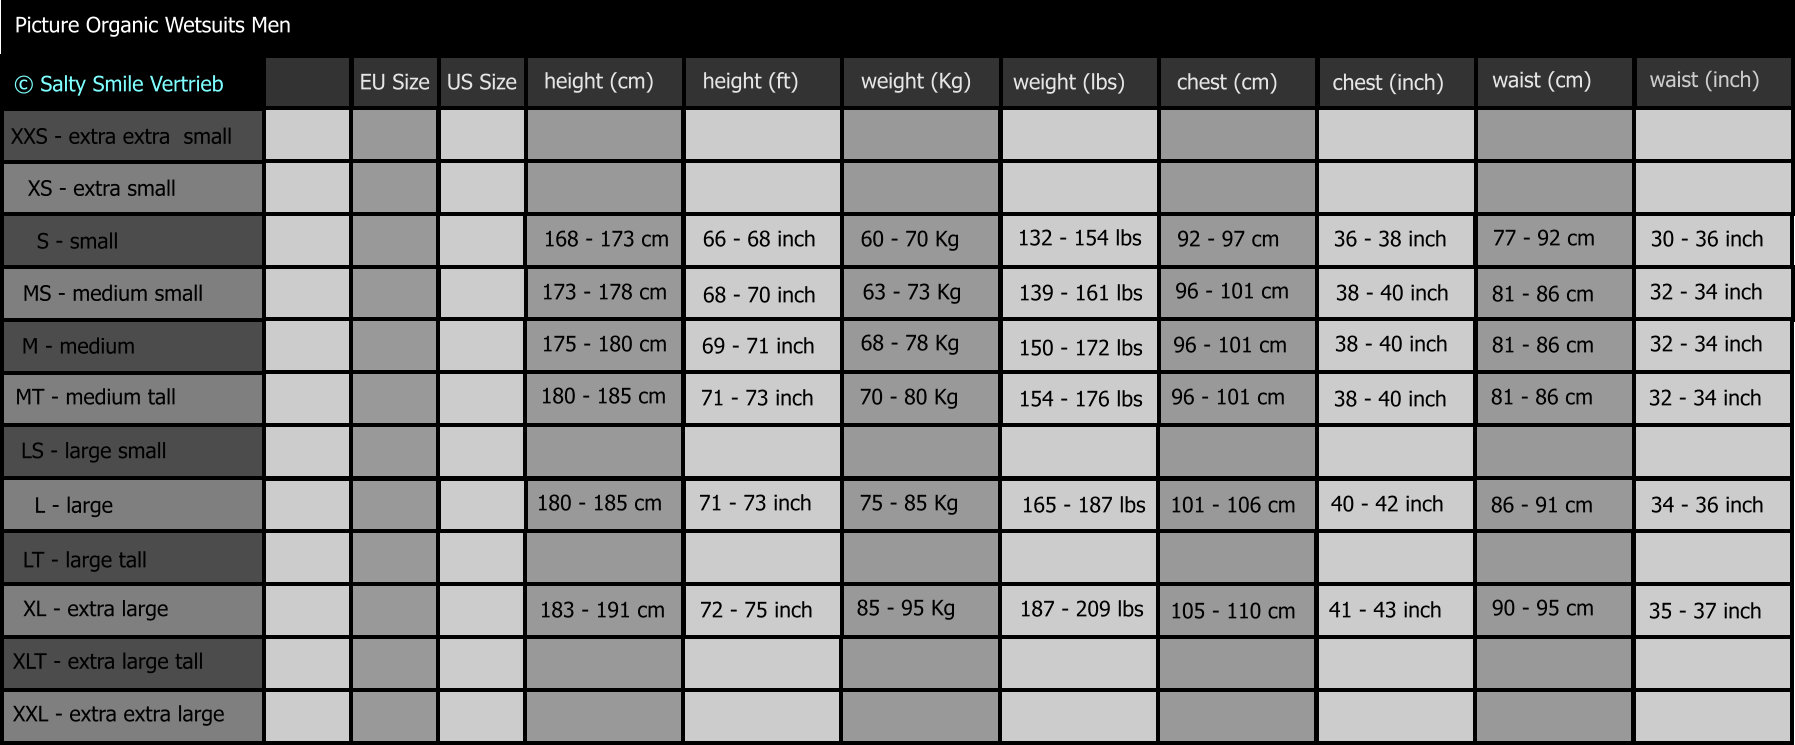 picture organic wetsuits size chart men